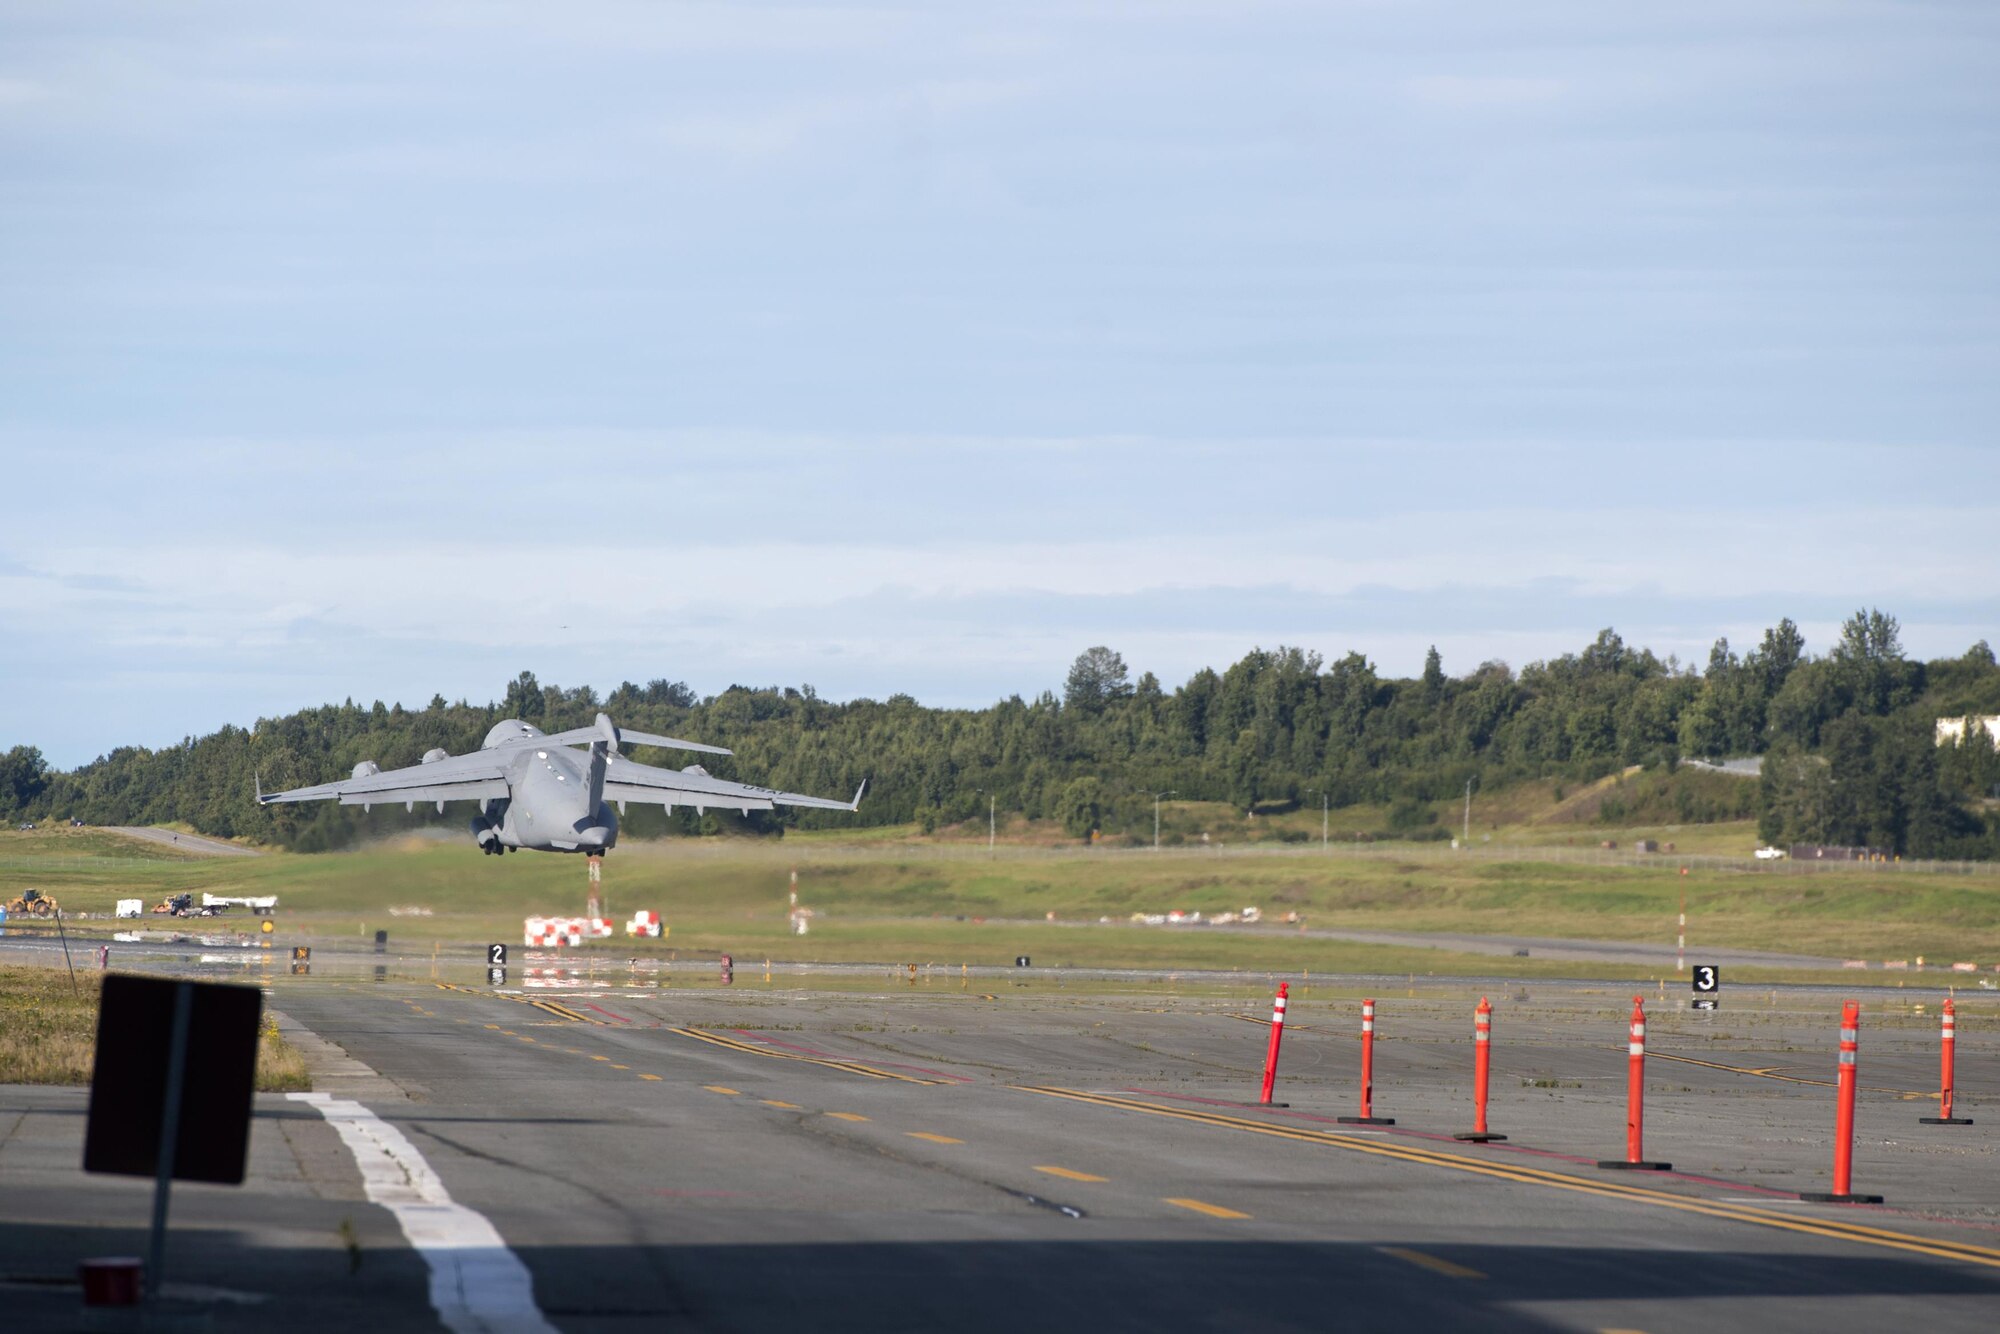 A Joint Base Elmendorf-Richardson C-17 Globemaster III takes off at JBER, Alaska, Aug. 28, 2017. Airmen of the Alaska Air National Guard’s 176th Wing will travel to Houston, Texas as part of a humanitarian mission in response to Hurricane Harvey.